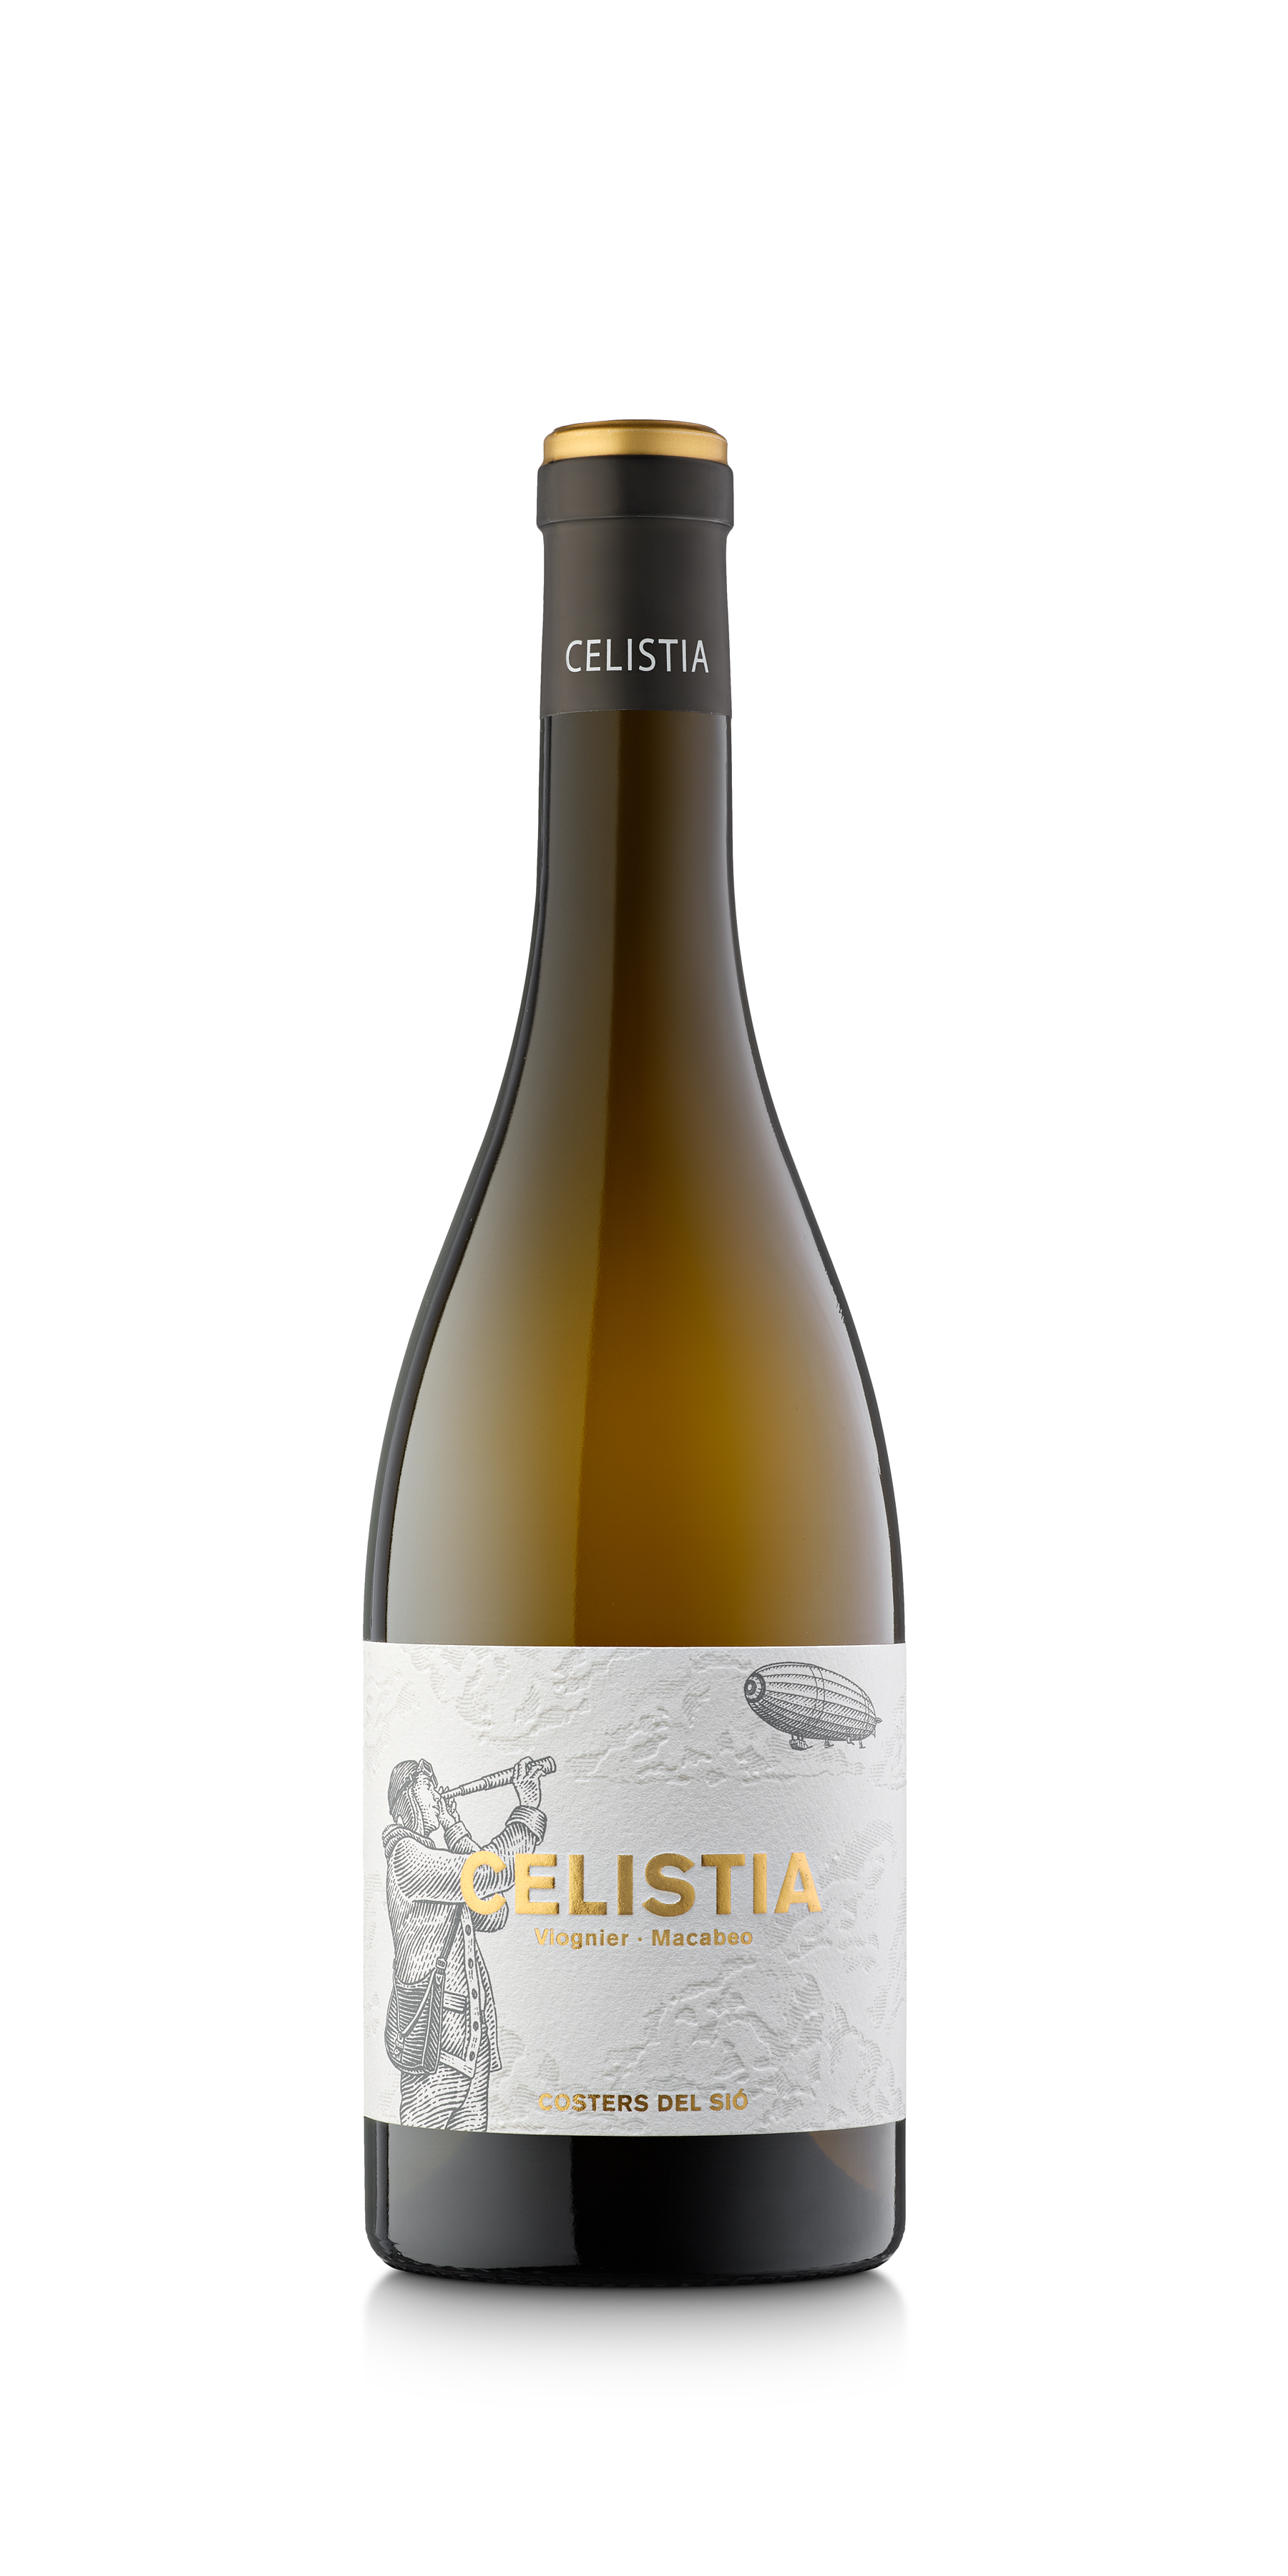 White wine Celistia bottle | Costers del Sió Winery